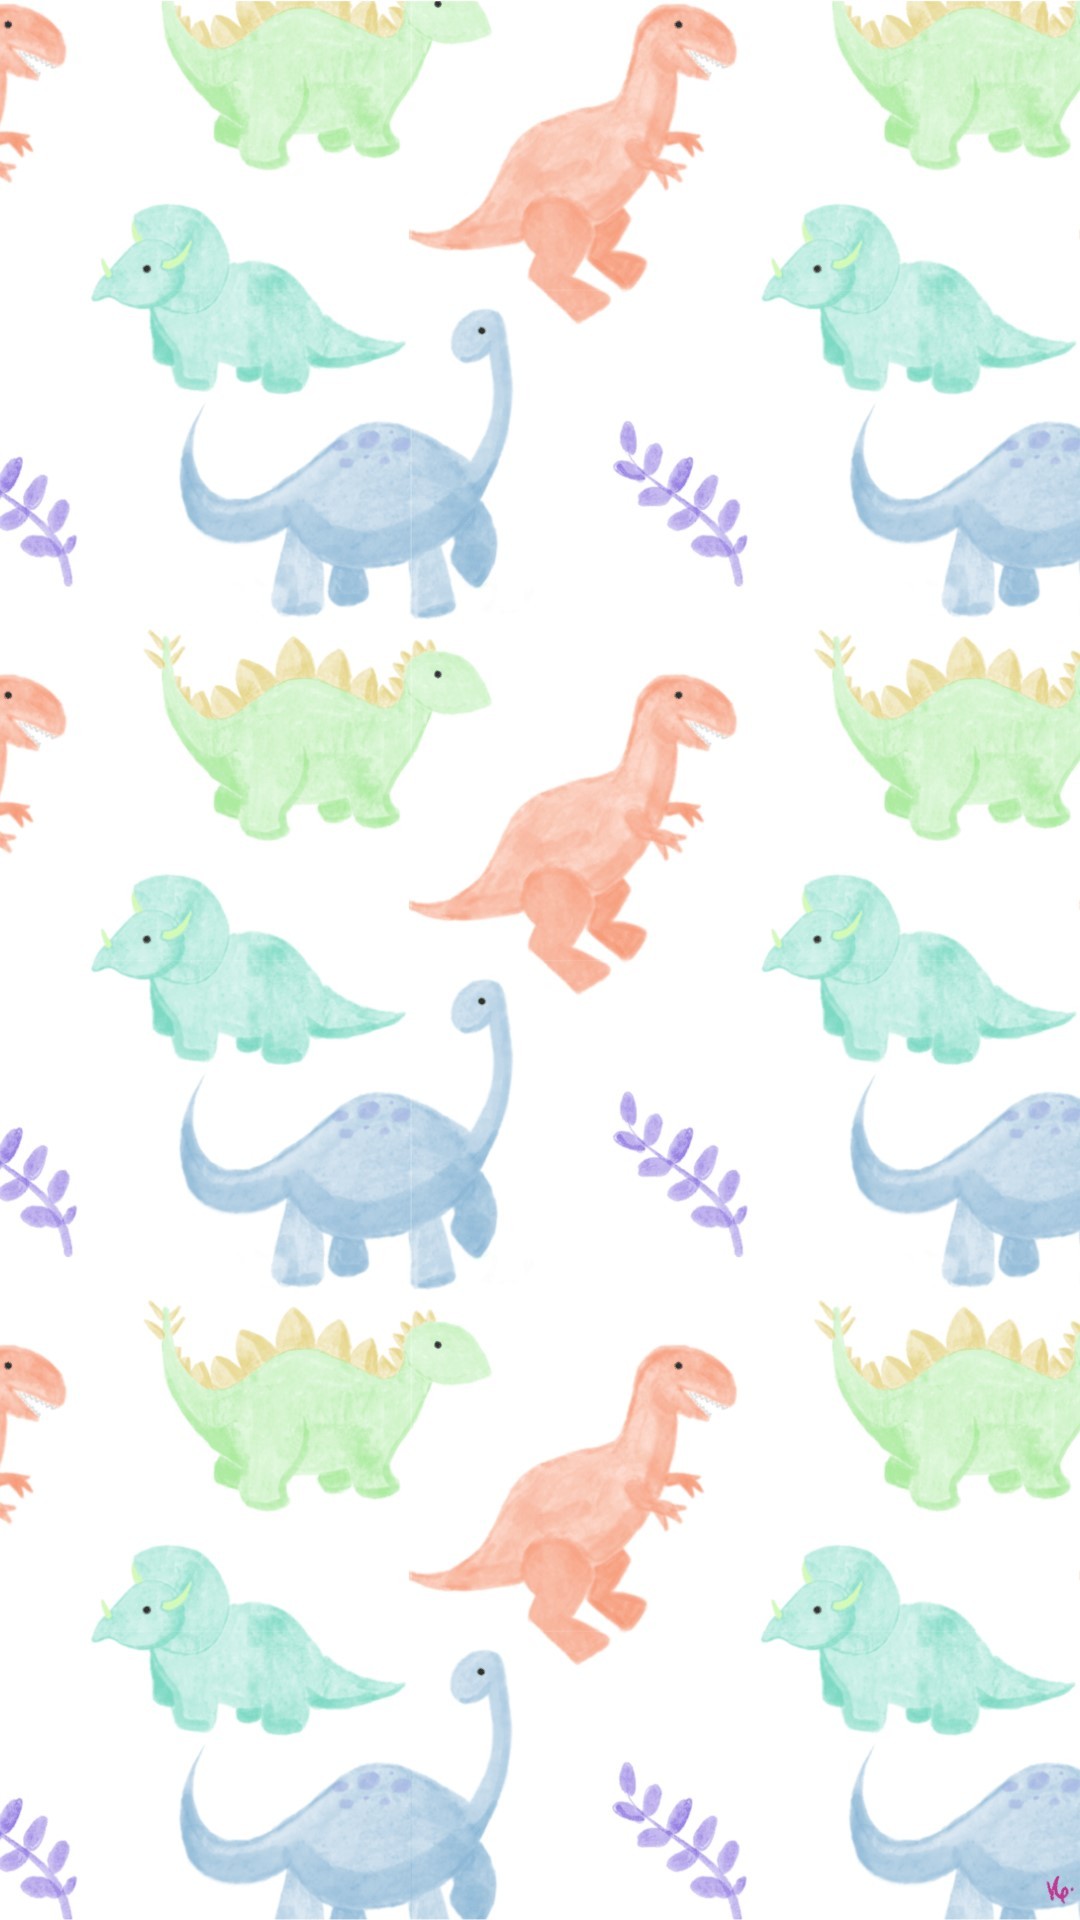 Aesthetic Dinosaur Wallpaper Awesome HD